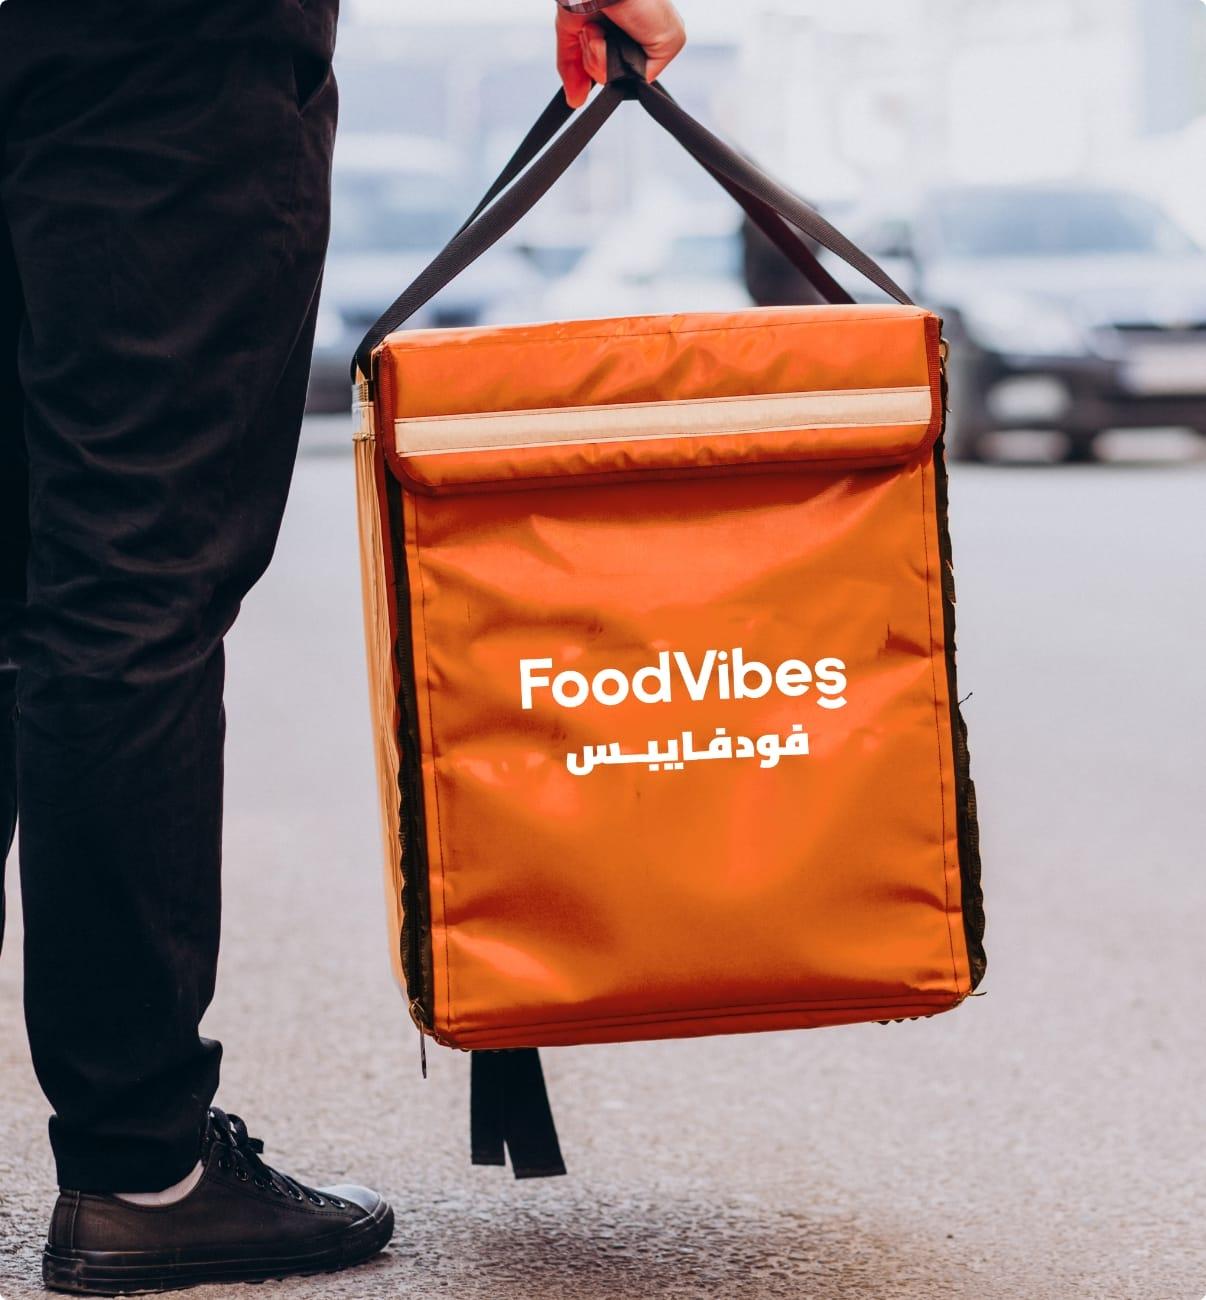 FoodVibes delivery man